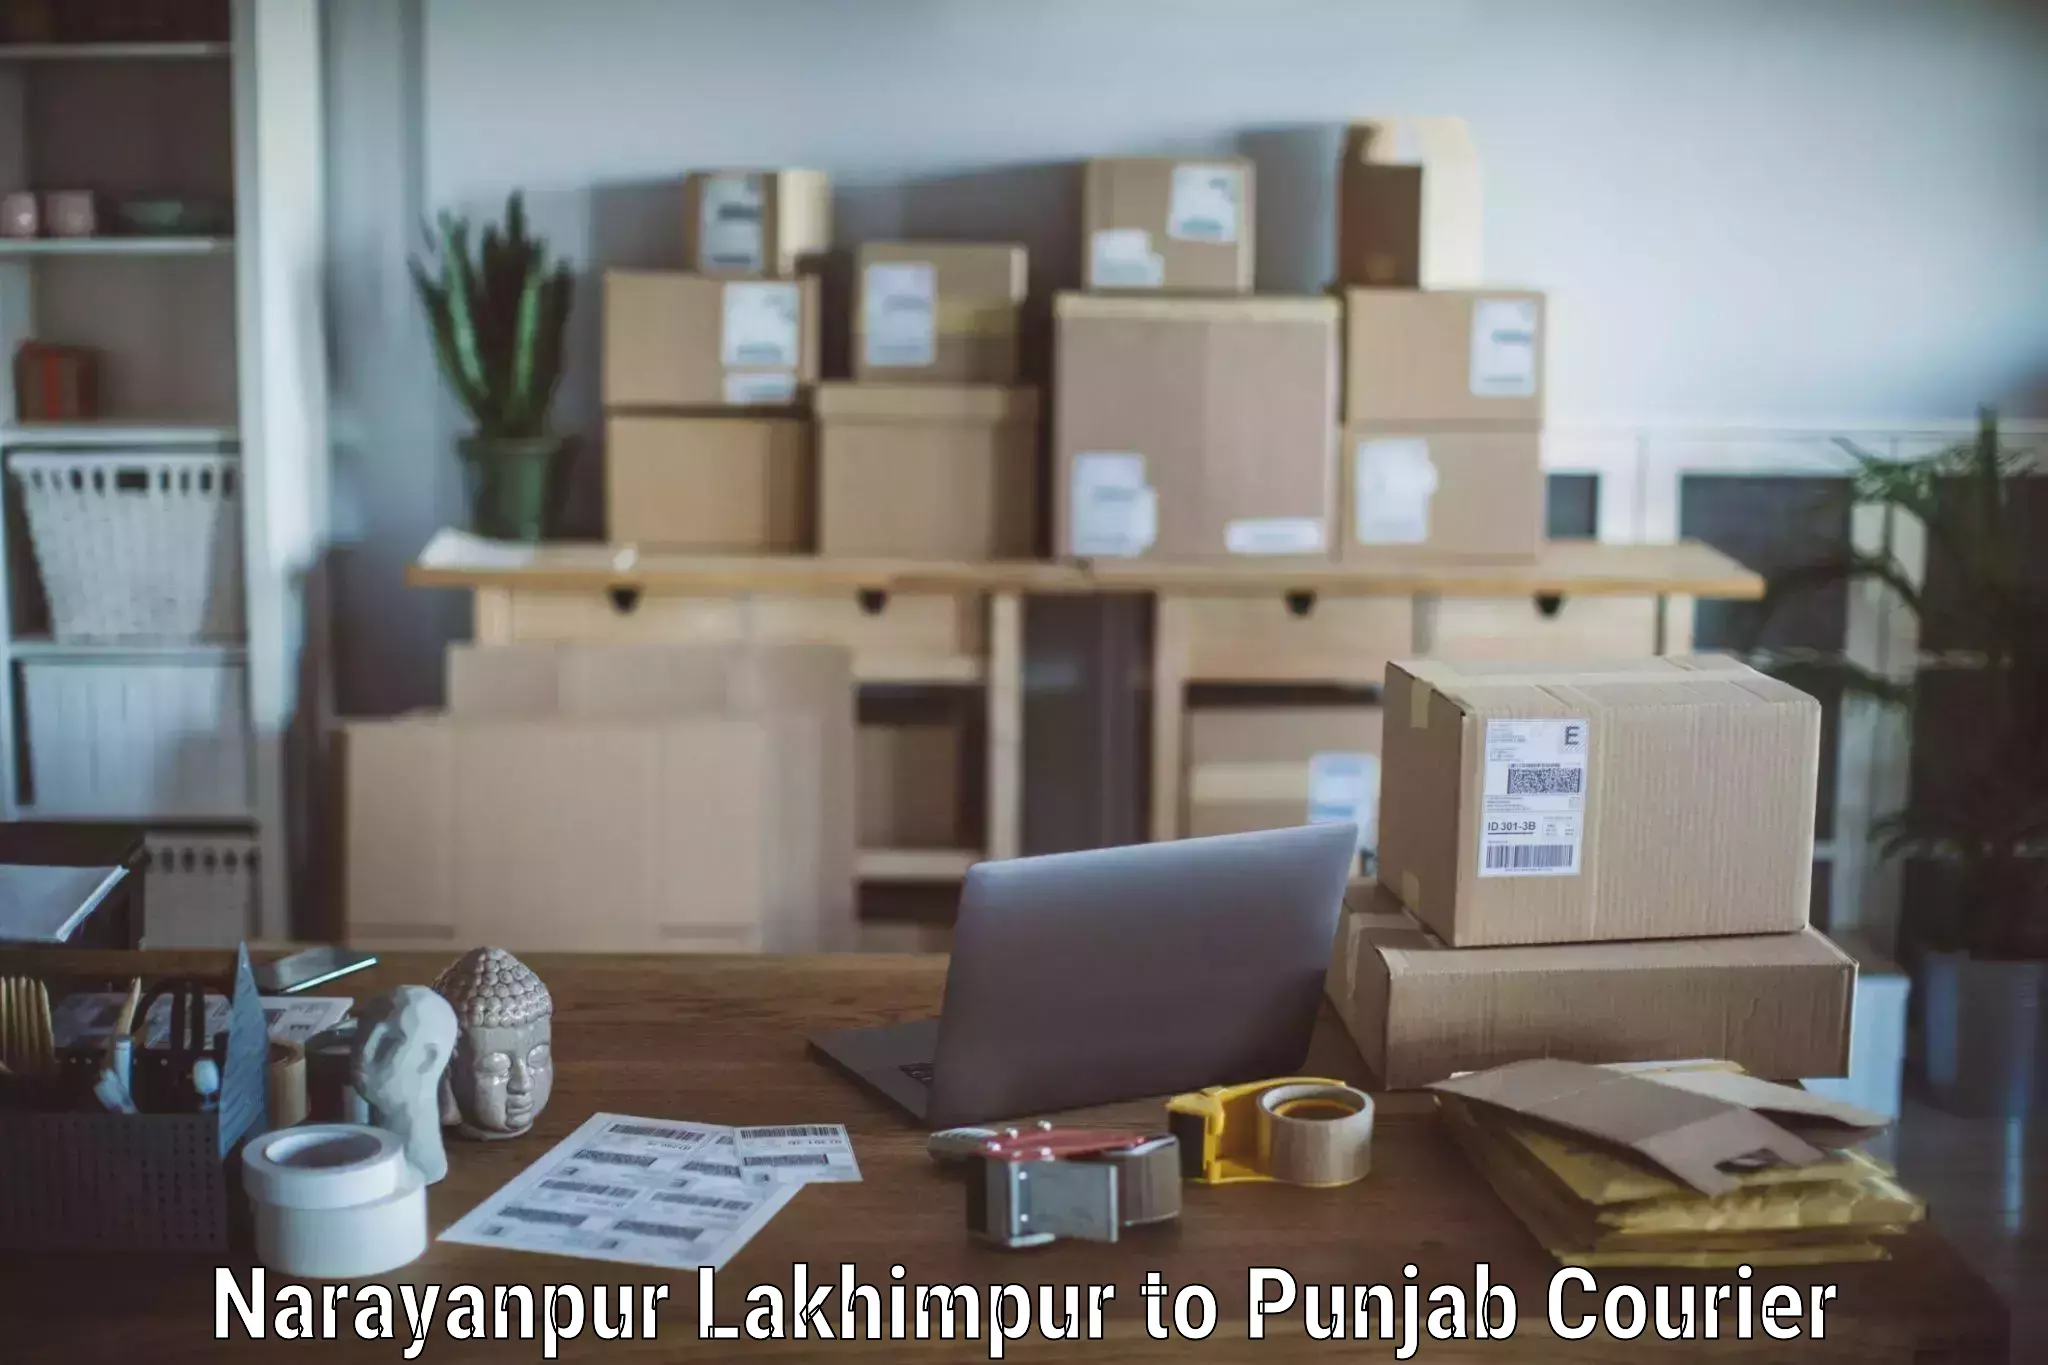 Hassle-free relocation Narayanpur Lakhimpur to Dhilwan